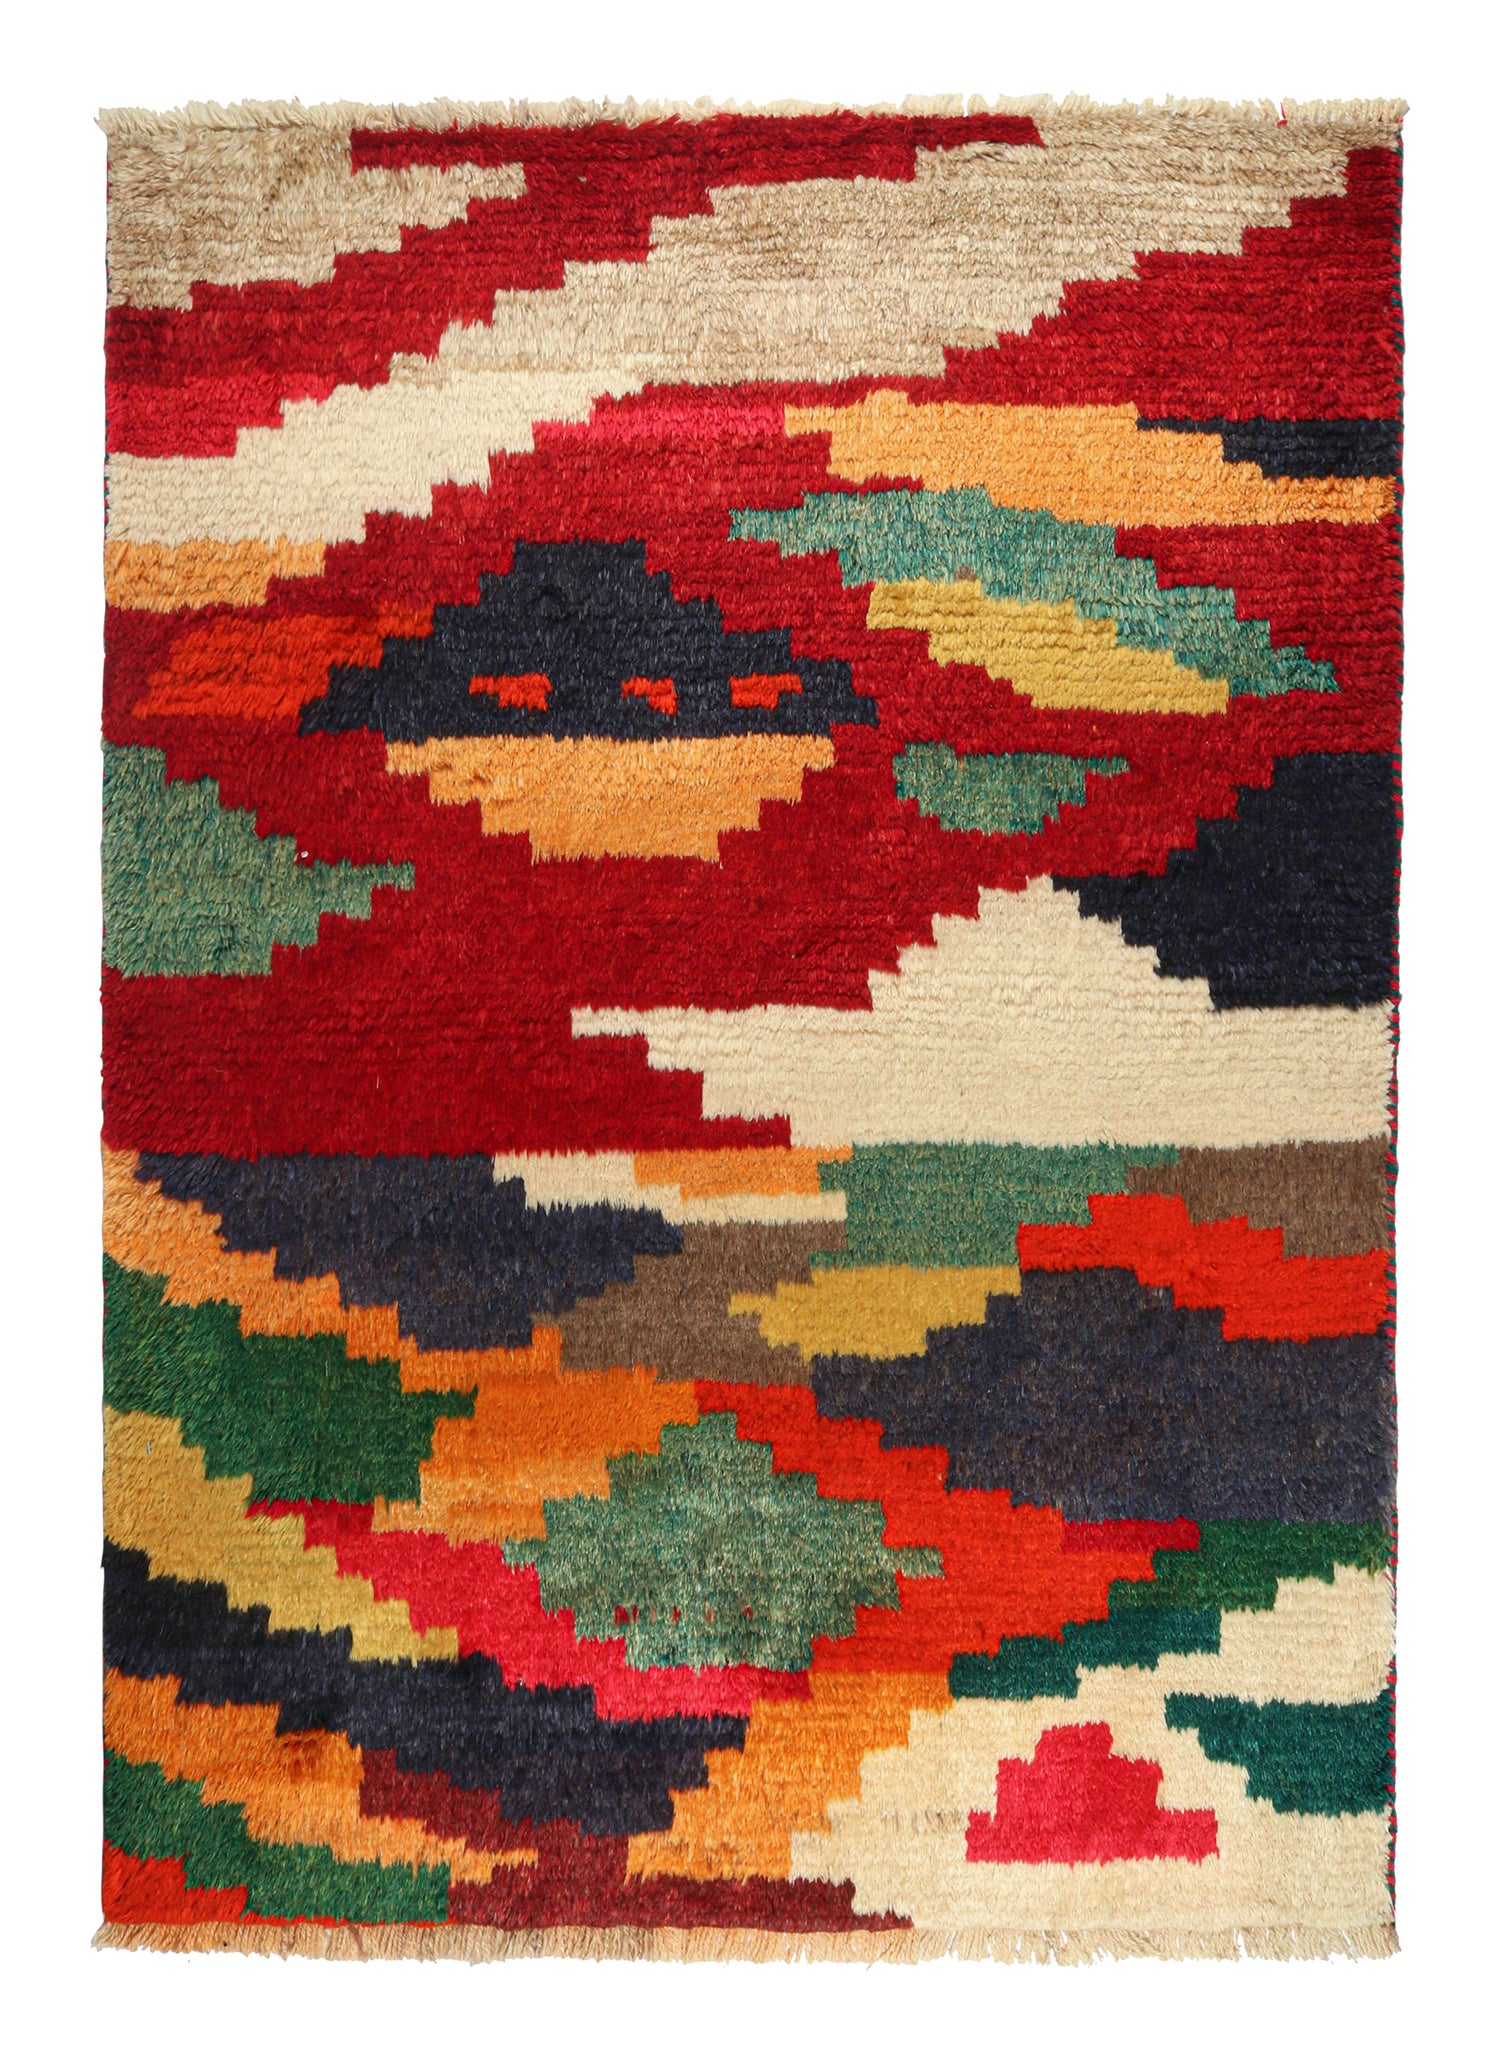 Vintage Gabbeh Persian Tribal Rug in Vibrant Geometric Patterns by Rug & Kilim For Sale